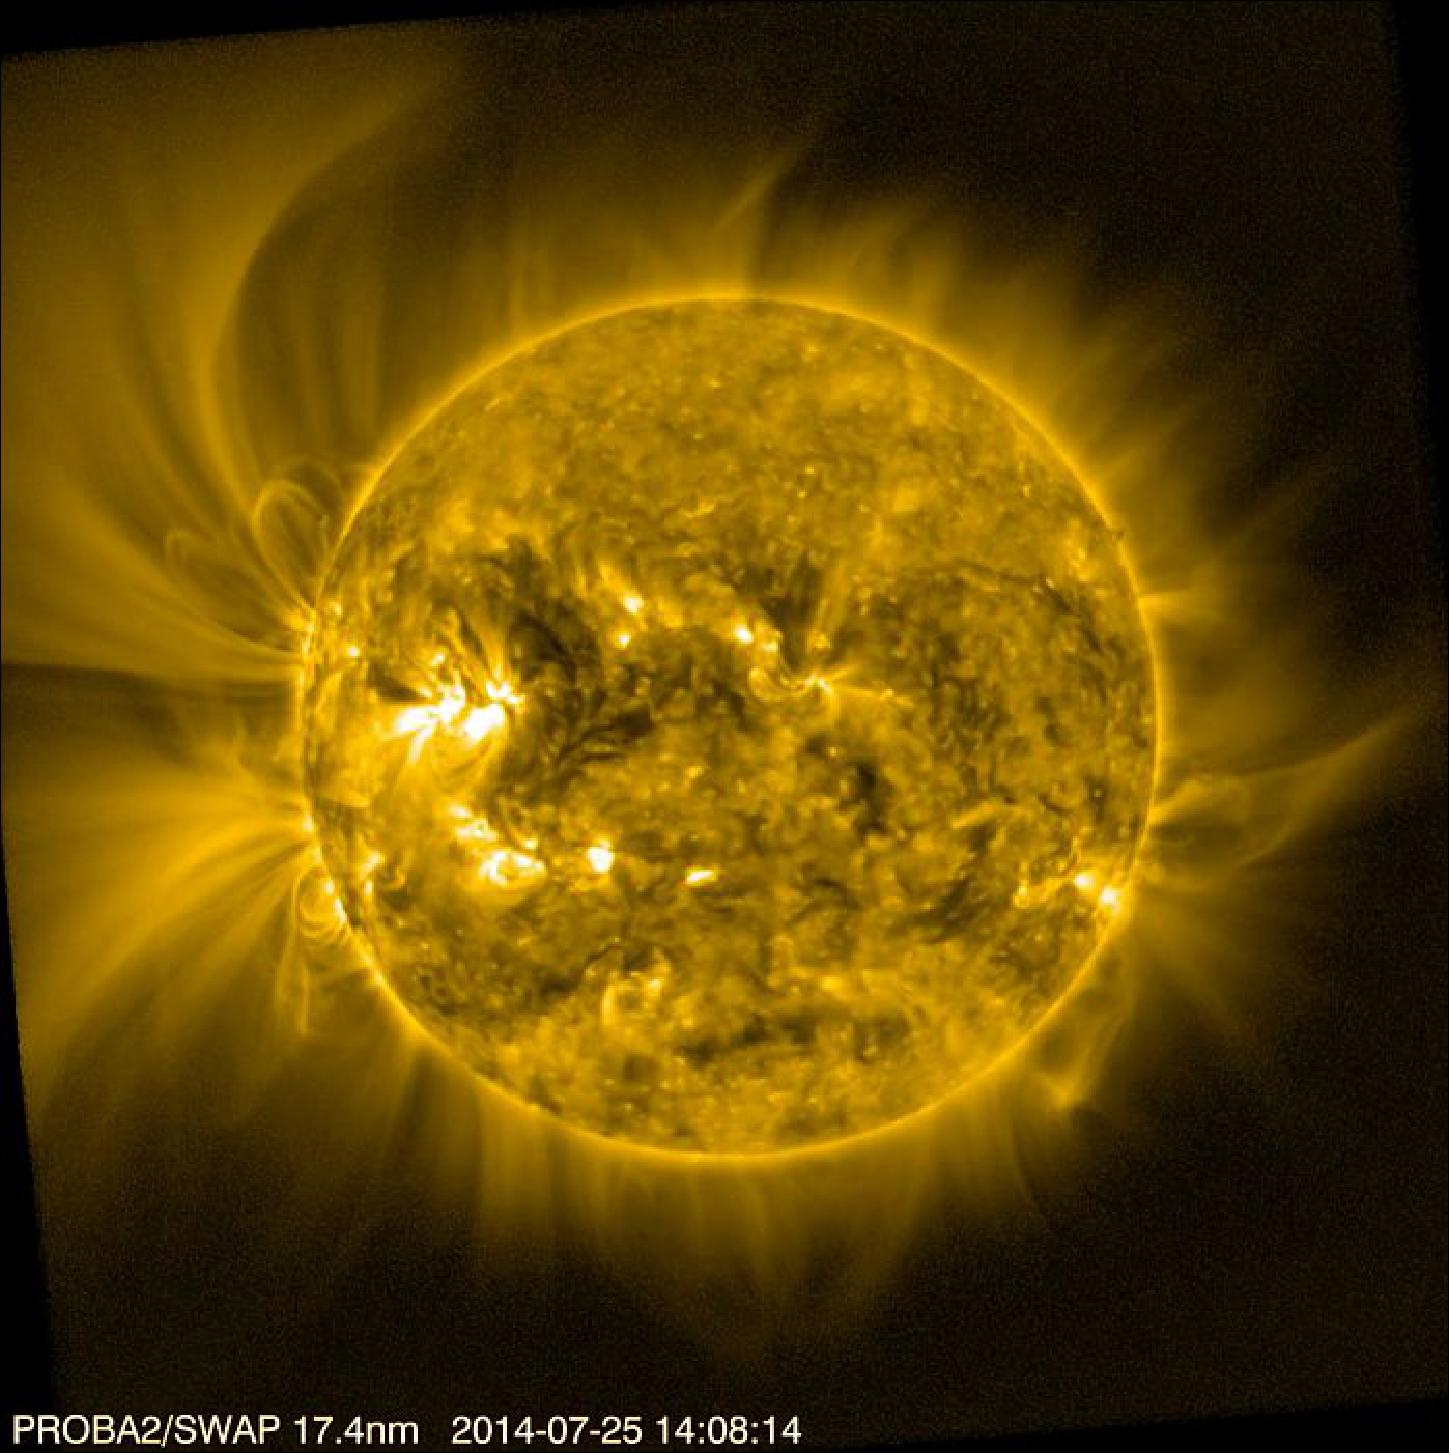 Figure 34: The solar corona acquired by the SWAP instrument of PROBA-2 on July 25, 2014 [image credit: ESA, ROB (Royal Observatory of Belgium)]